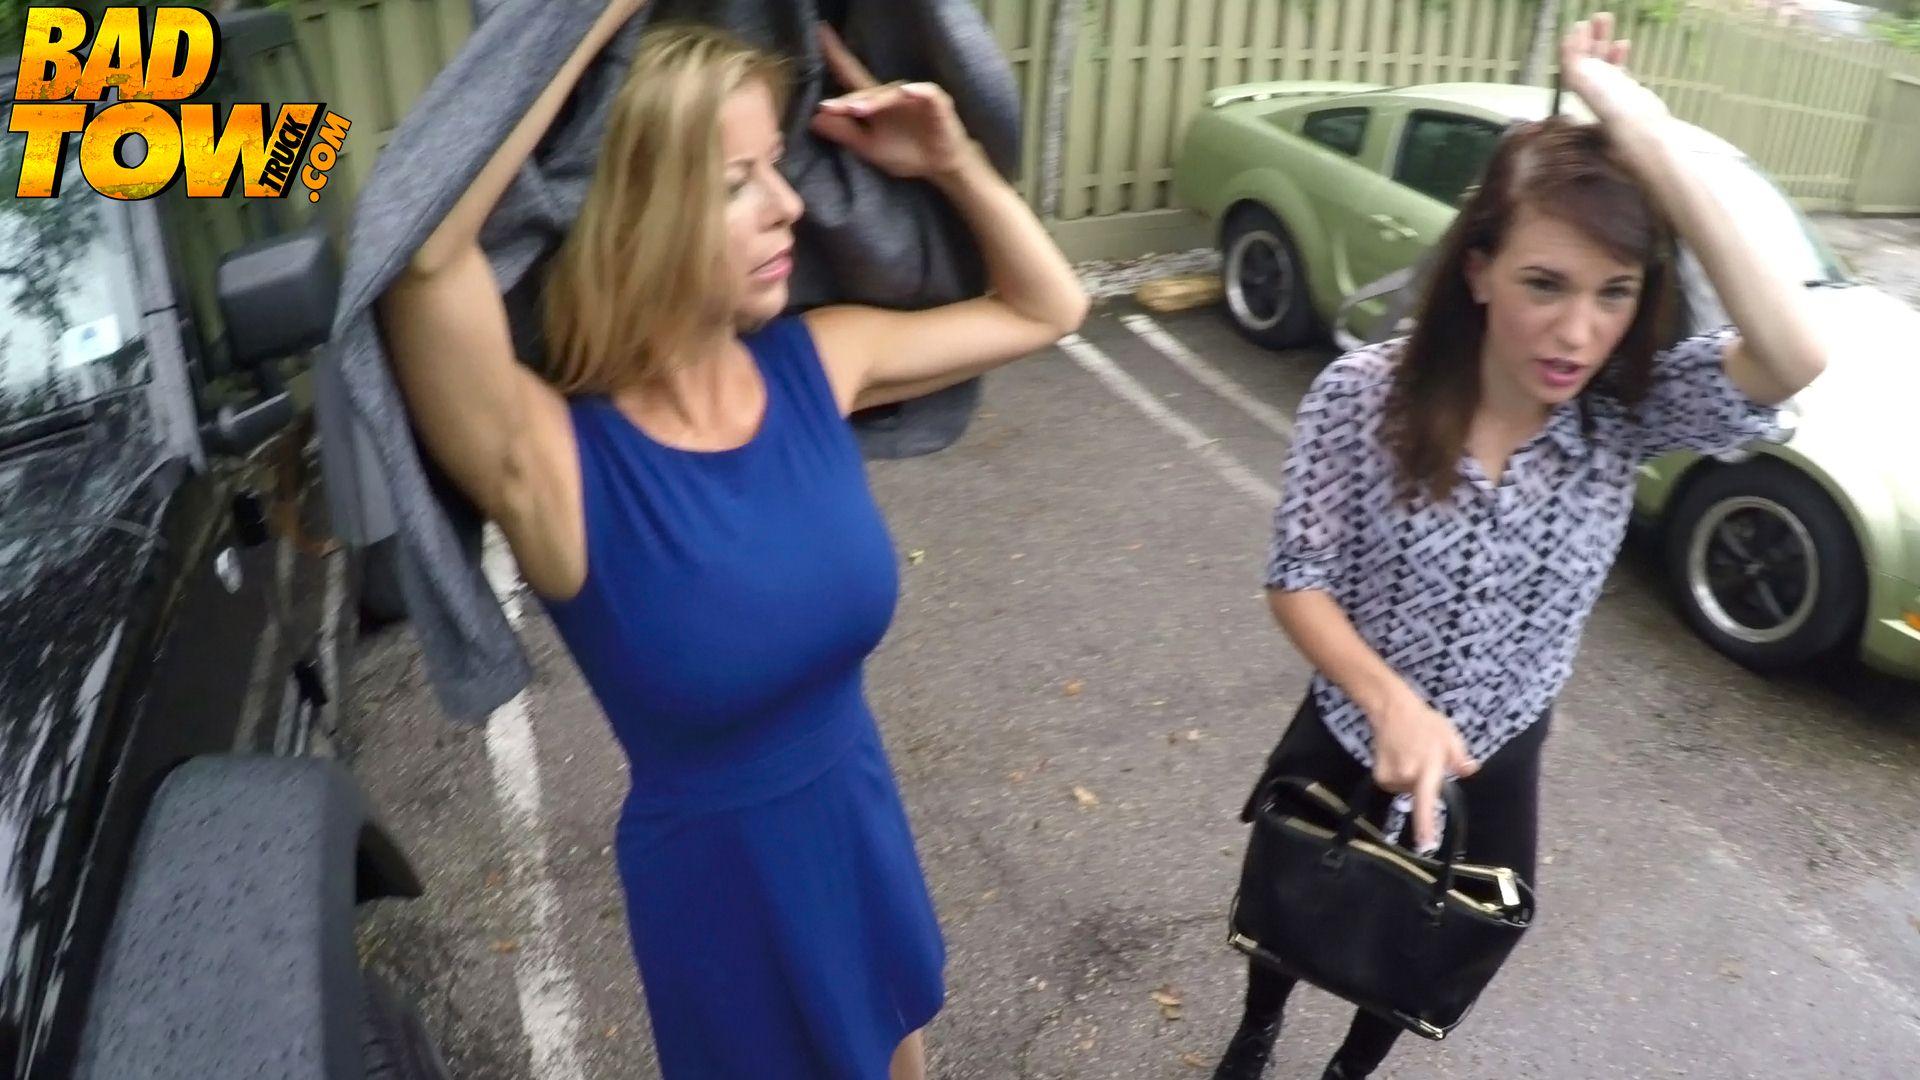 Busty blonde Alexis Fawks blows a guy to get her car back #52971973